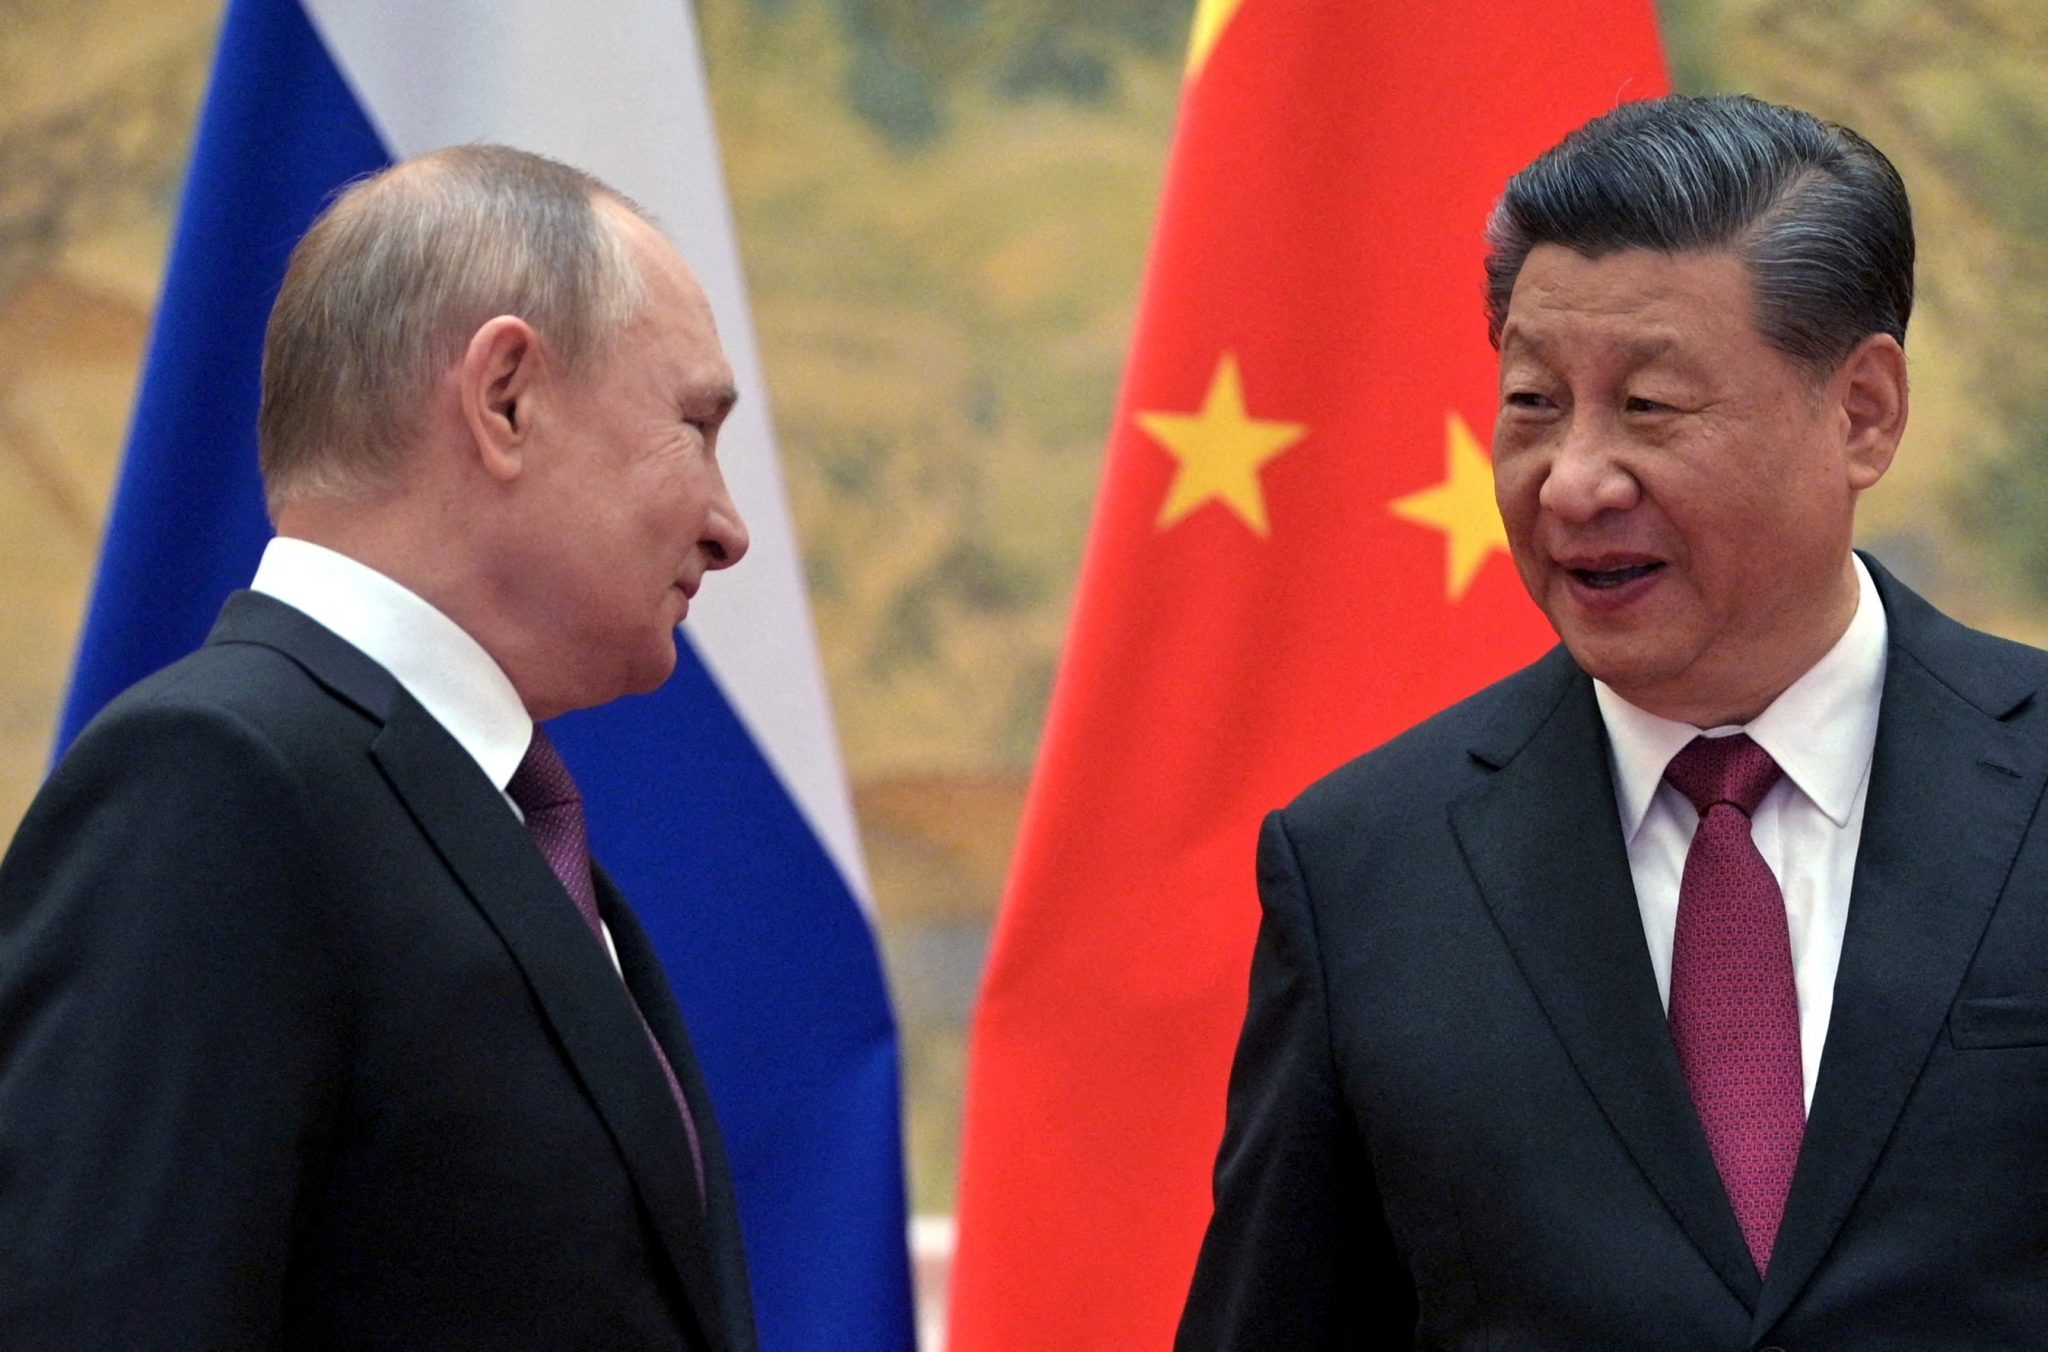 The limits to Russia and China's 'no limits' friendship | East Asia Forum